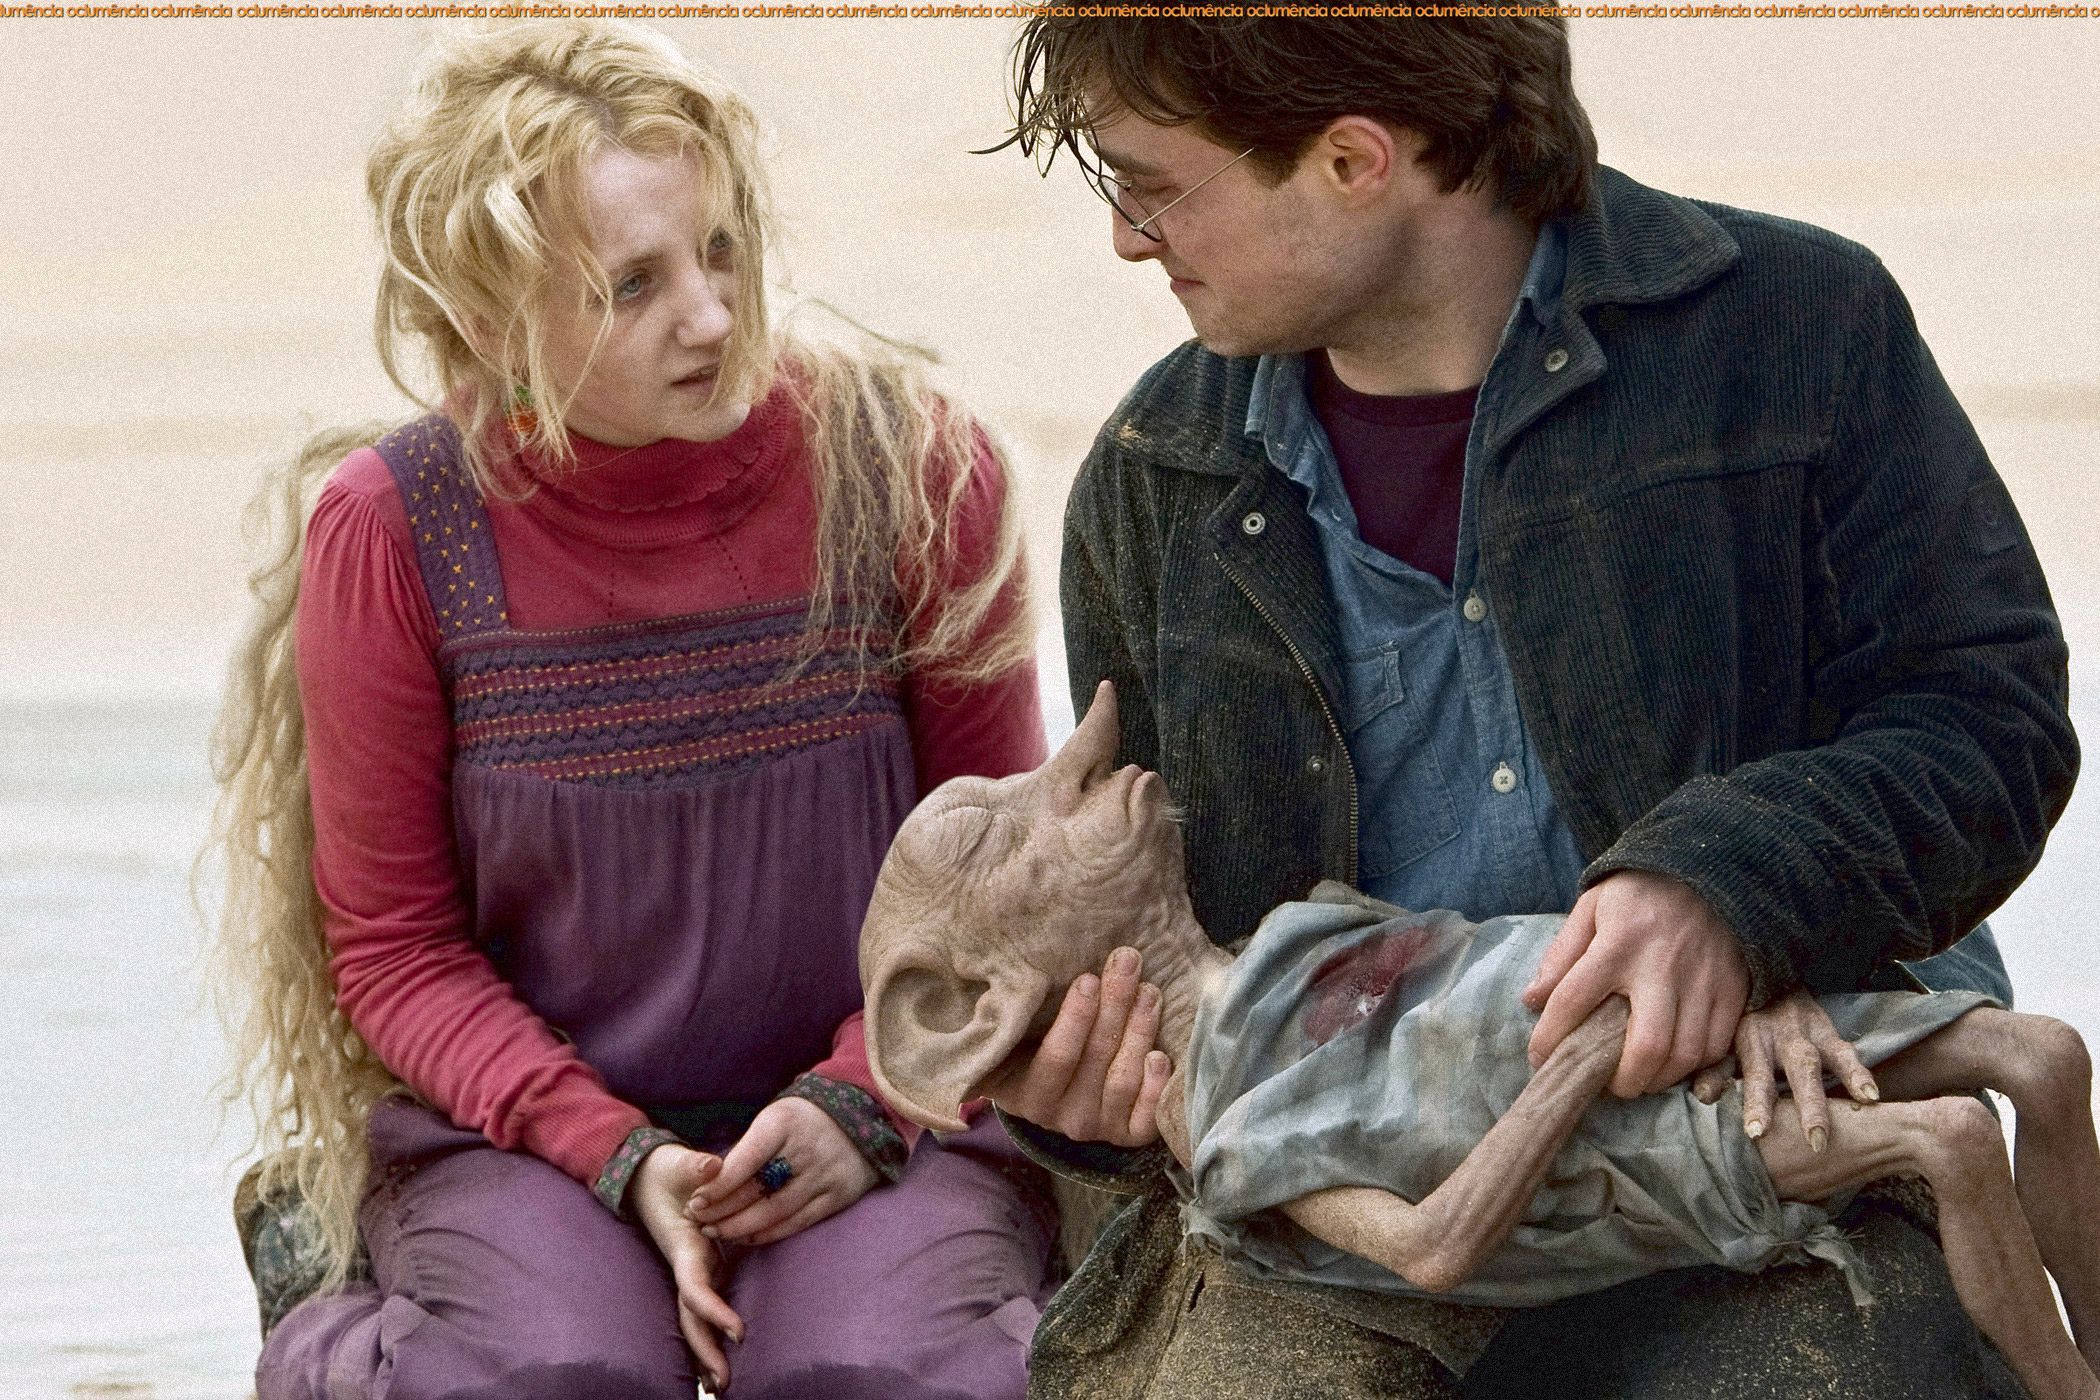 Luna-with-Harry-and-Dobby-ravenclaw-28261128-2100-1400